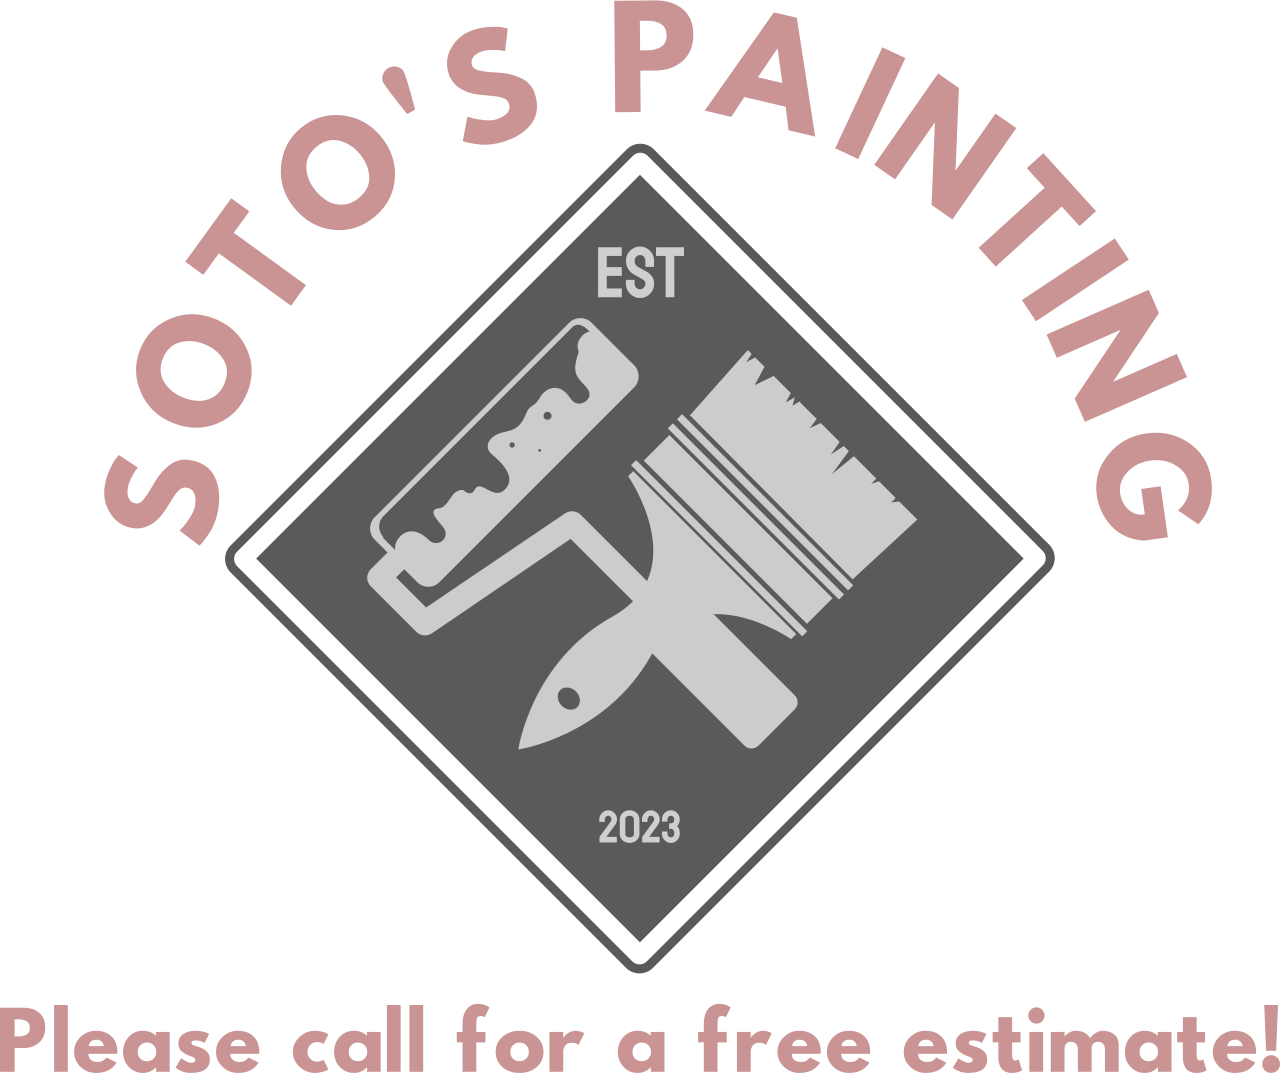 Soto's Painting's web page